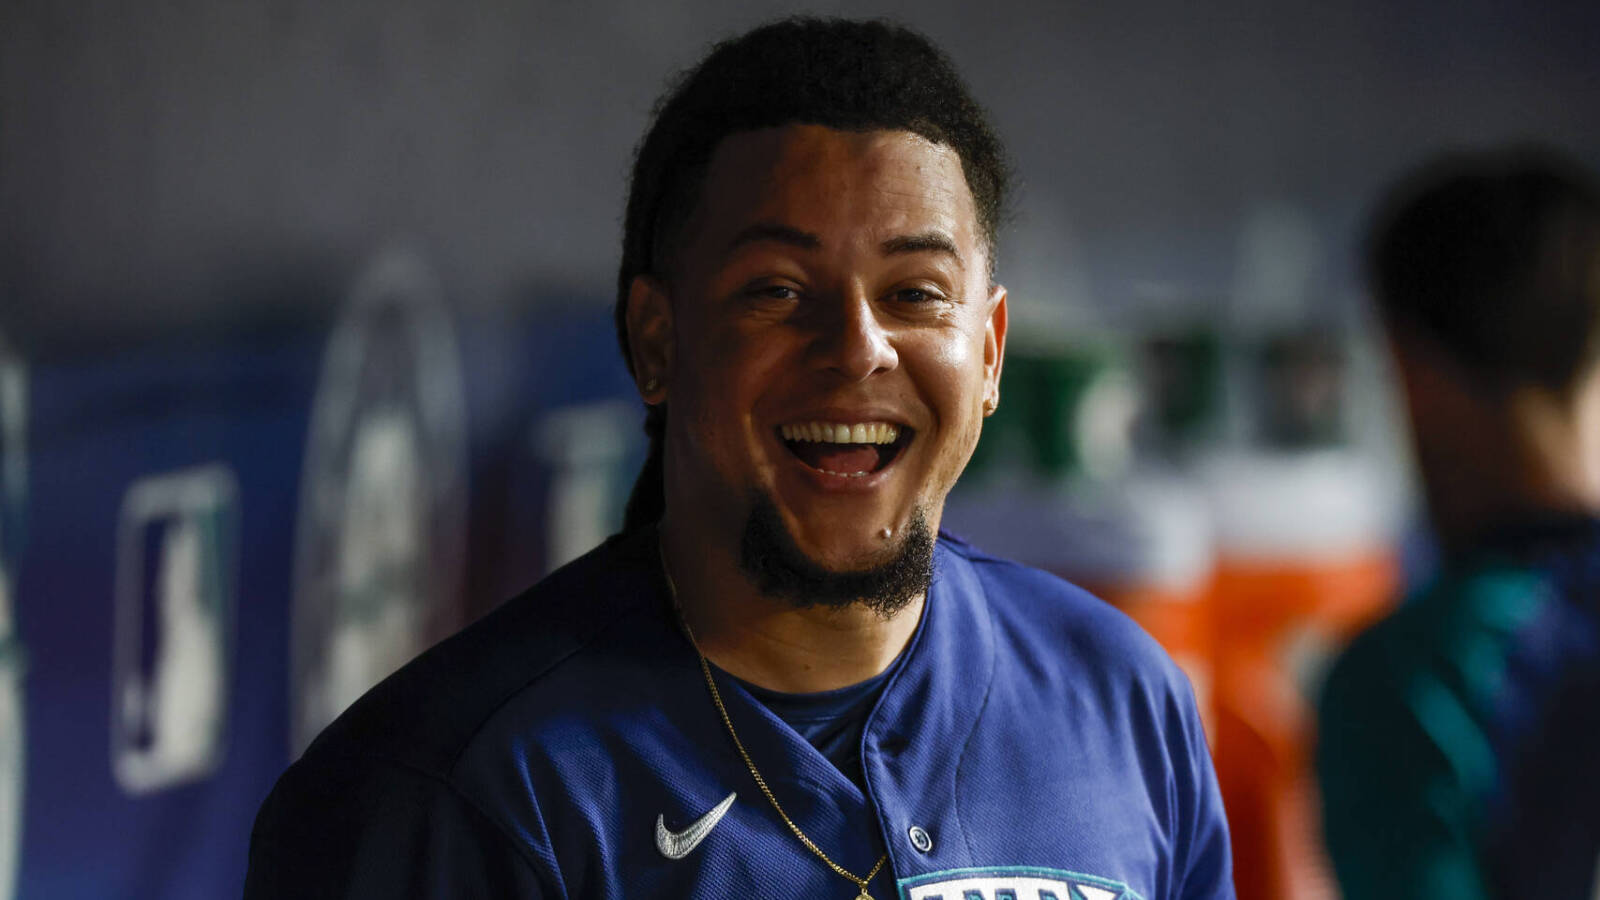 Report: Luis Castillo's new five-year extension with Mariners includes unique injury clause